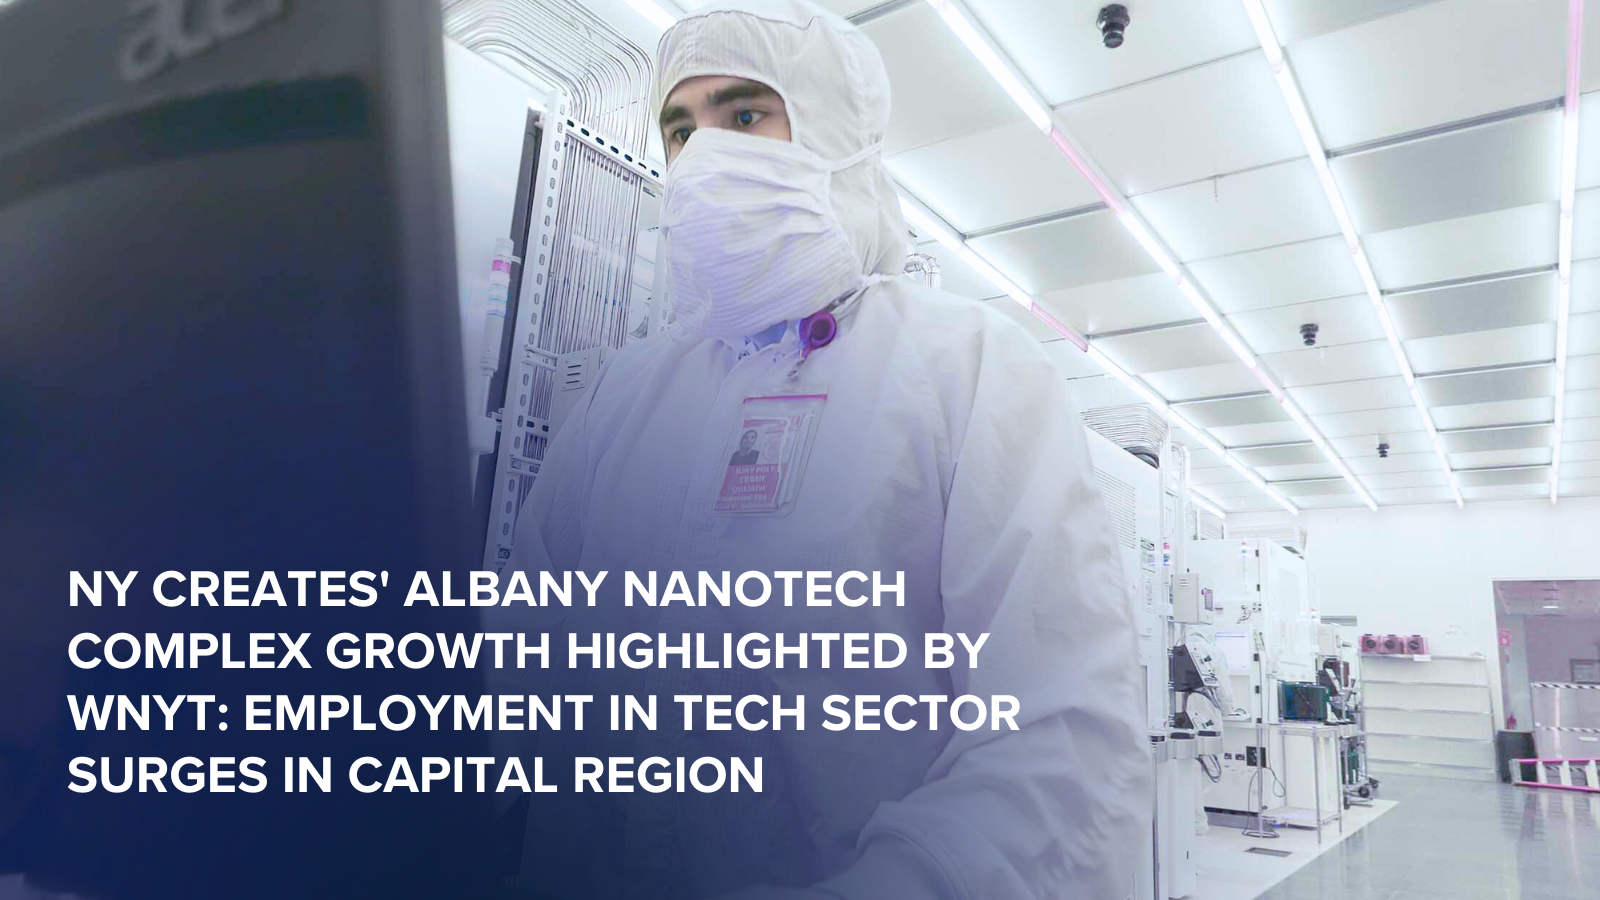 NewsChannel 13 Feature: Employment in Tech Sector Surges in Capital Region